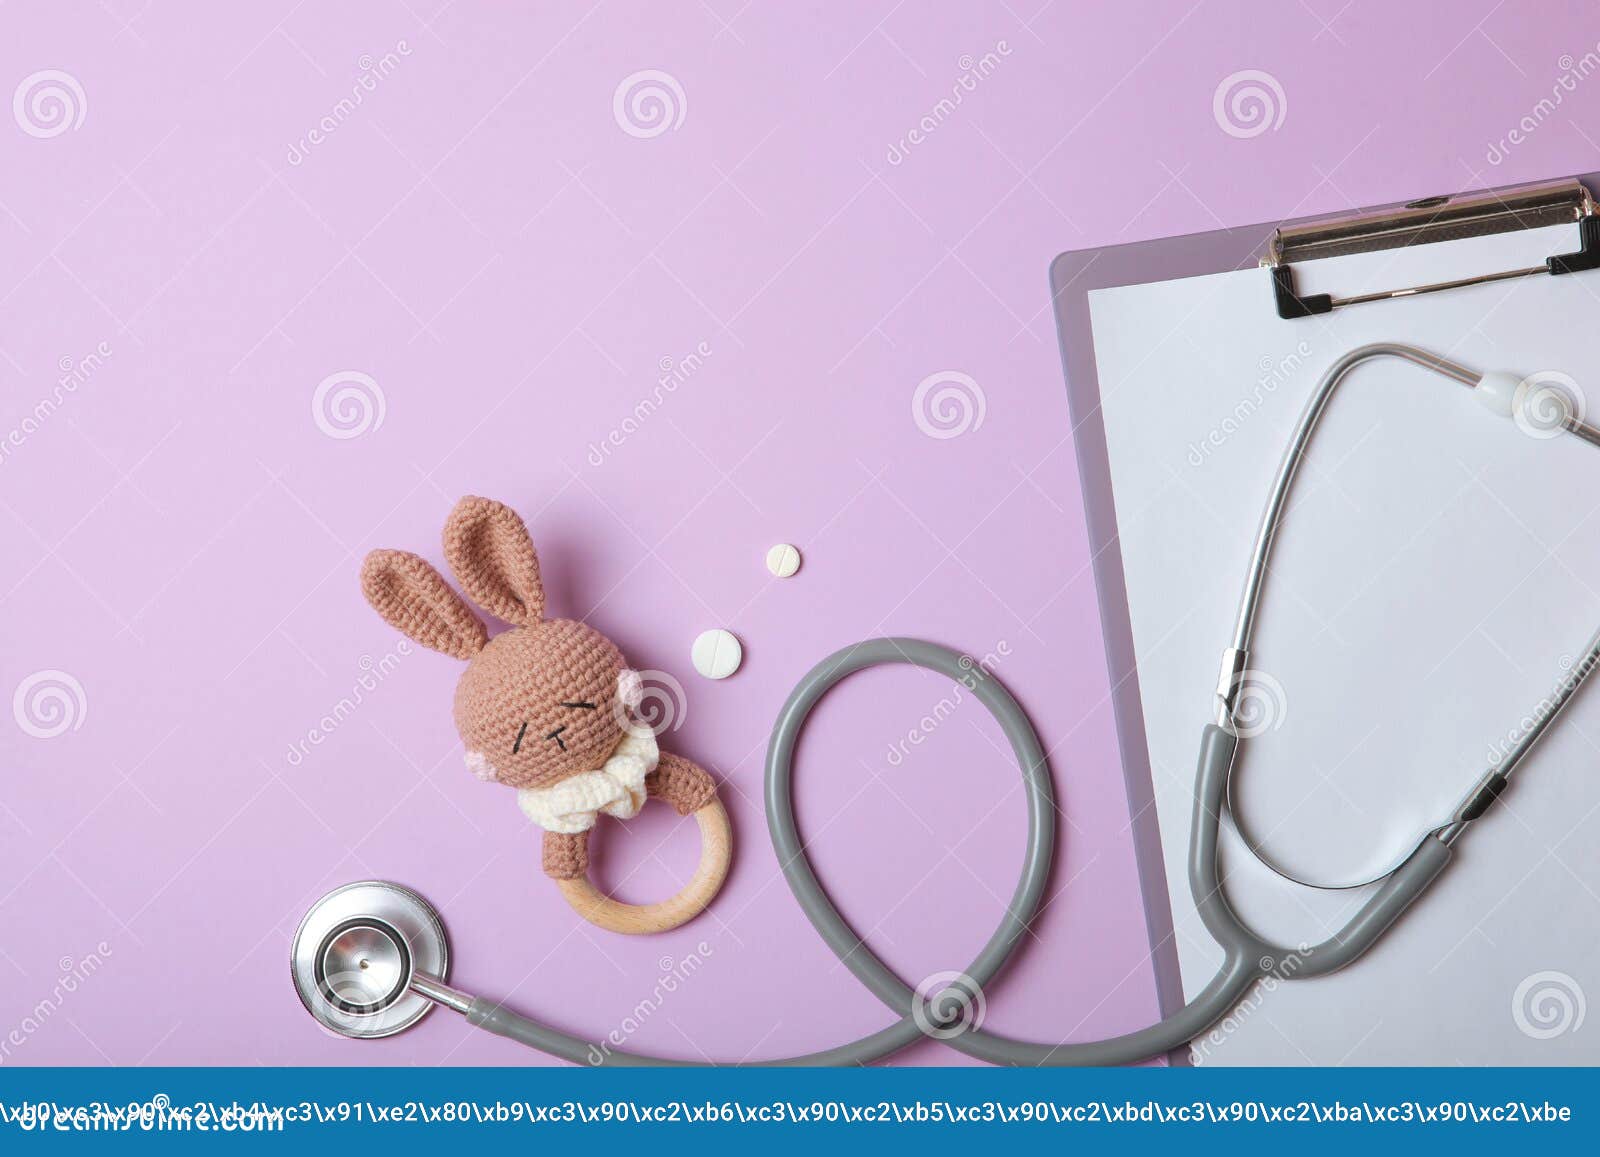 pediatrics concept. stethoscope and toy on a light background